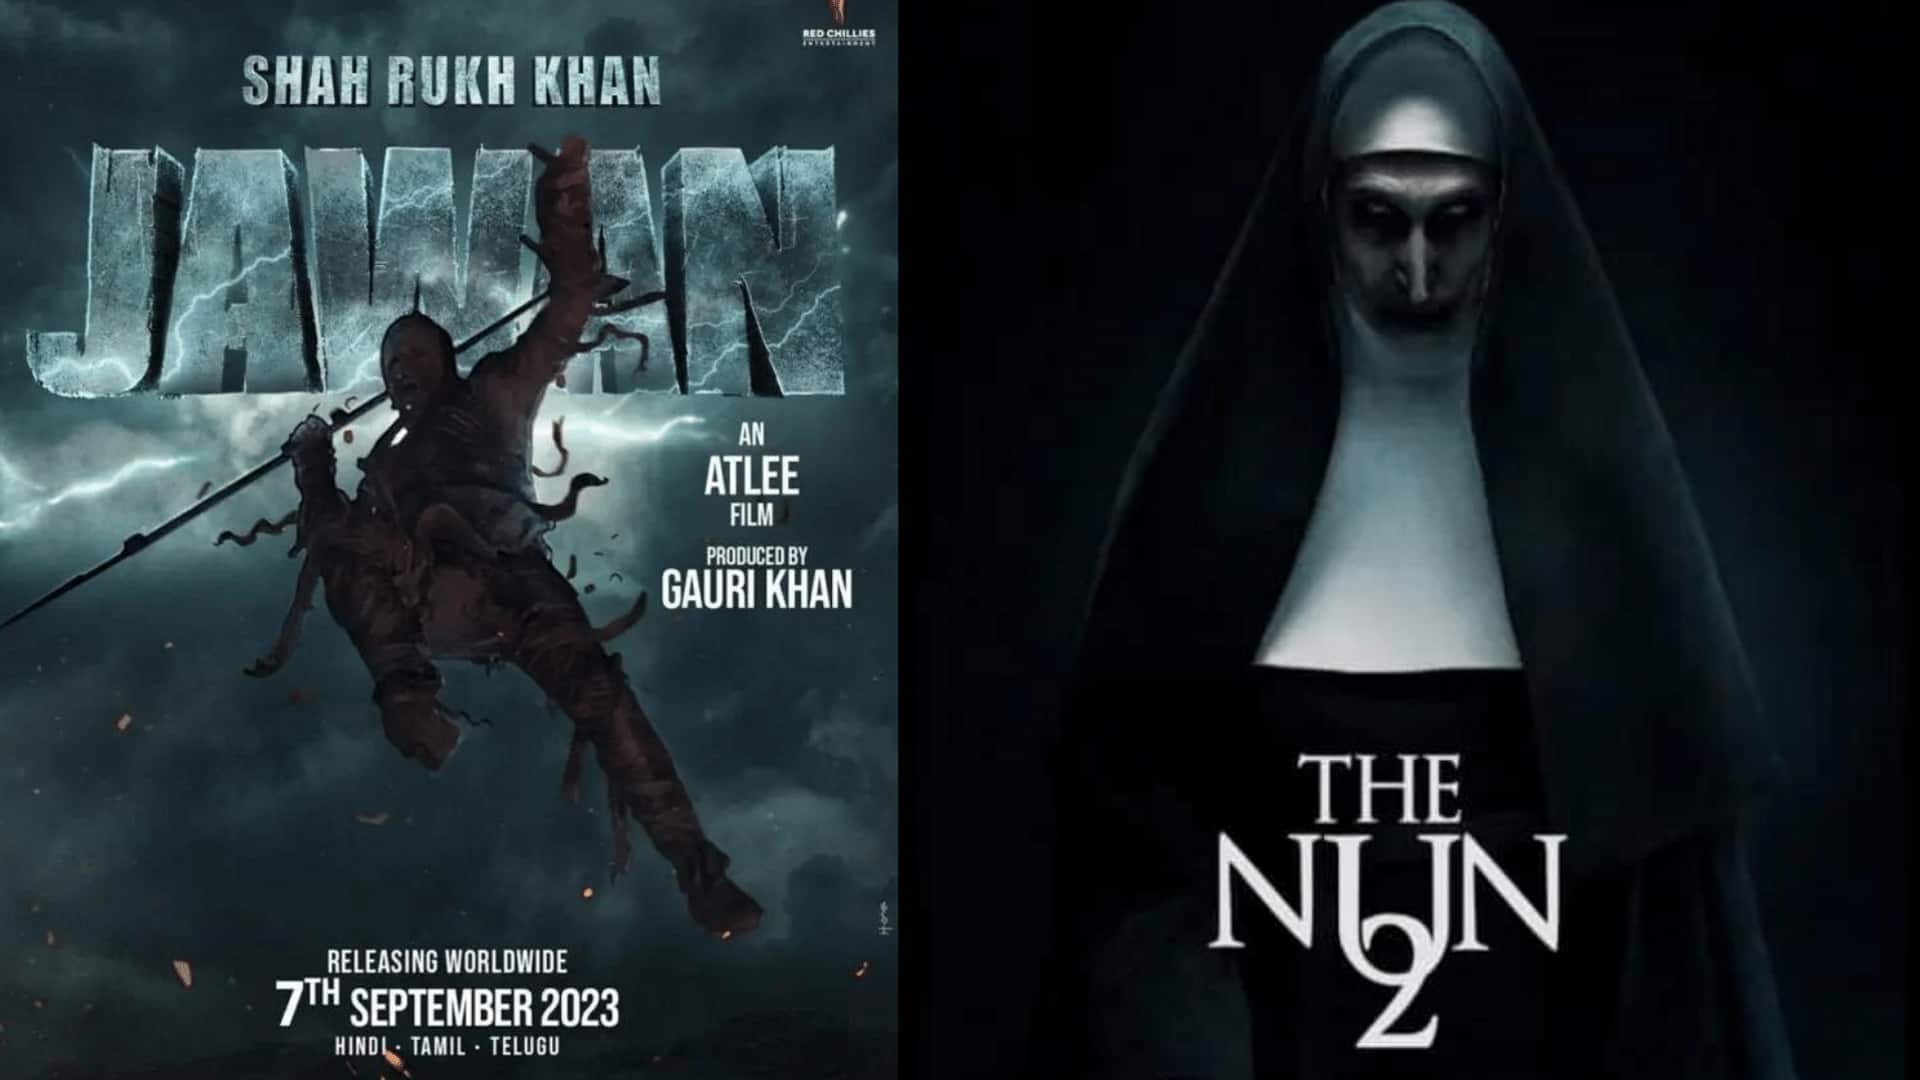 'The Nun II' fights for screens amid SRK's 'Jawan' release